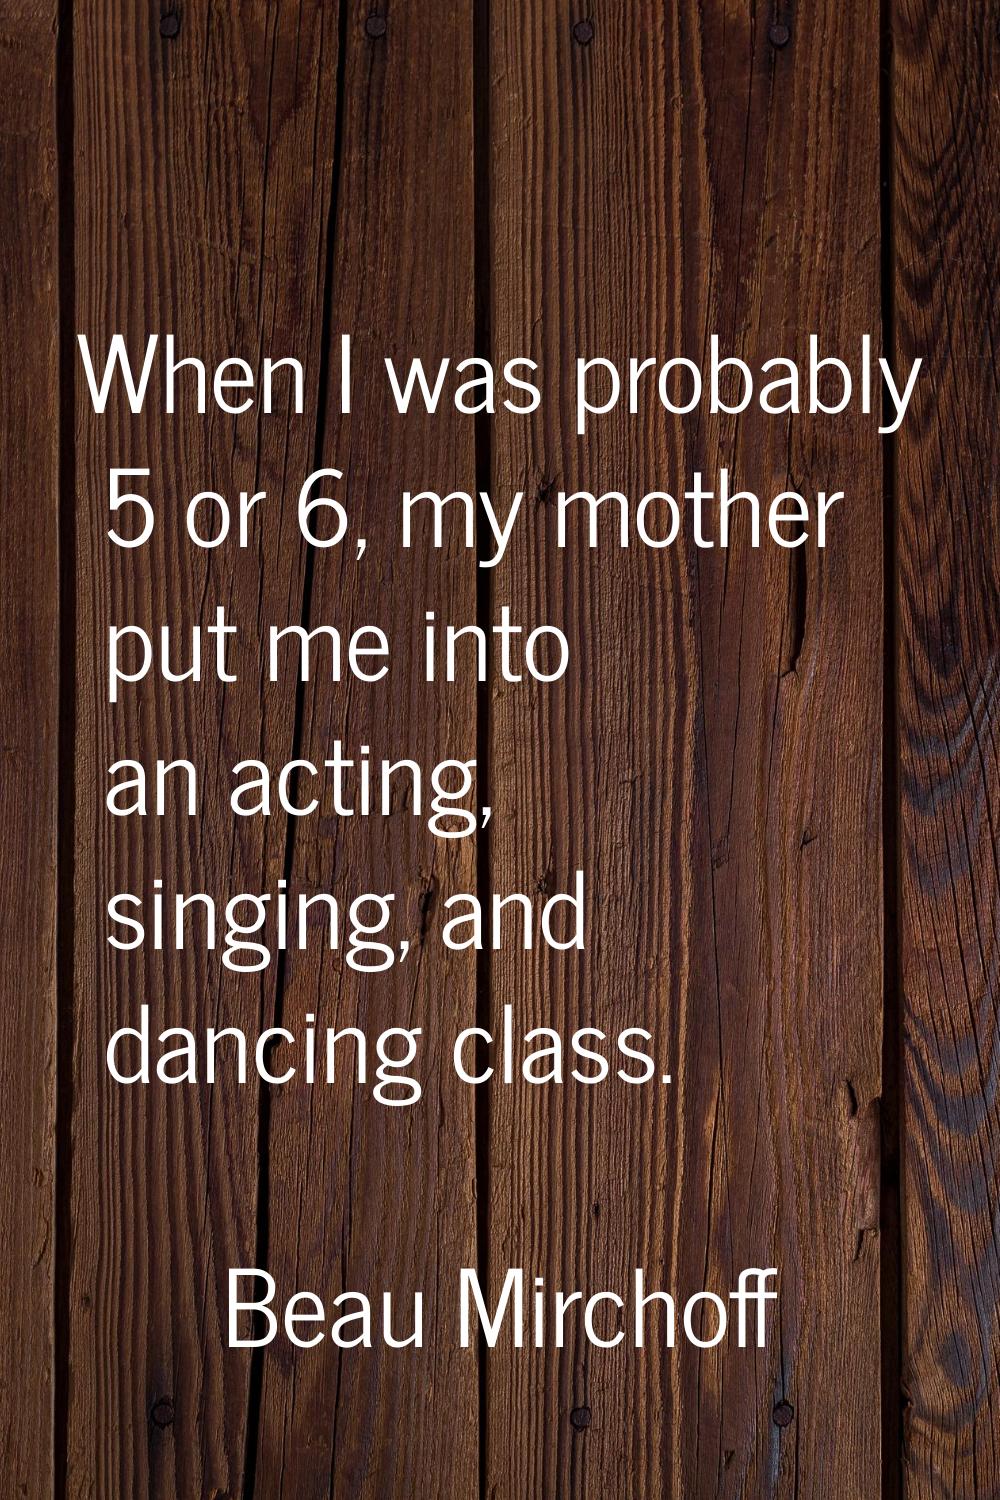 When I was probably 5 or 6, my mother put me into an acting, singing, and dancing class.